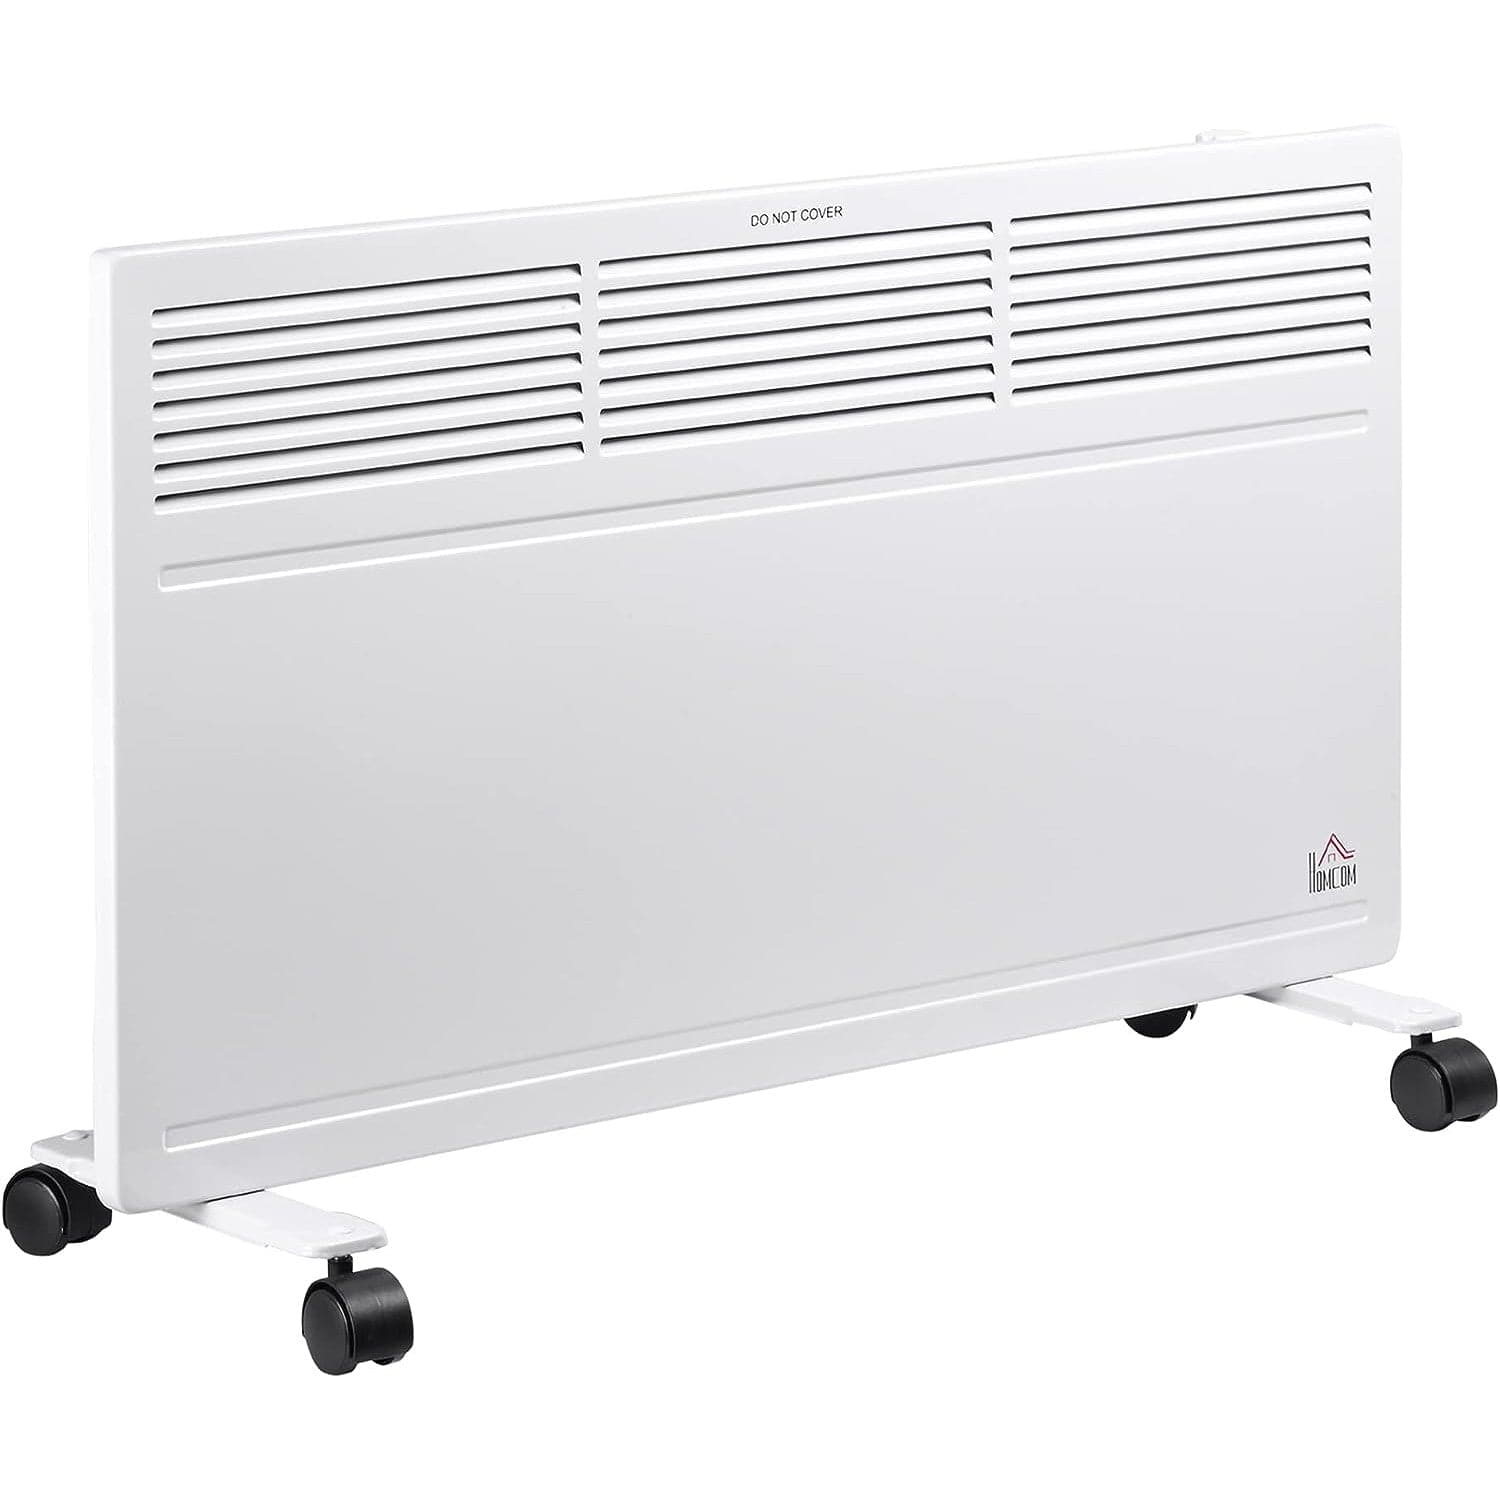 Maplin Plus Freestanding / Wall-Mounted Convector Portable Radiator Heater with Adjustable Thermostat (White)